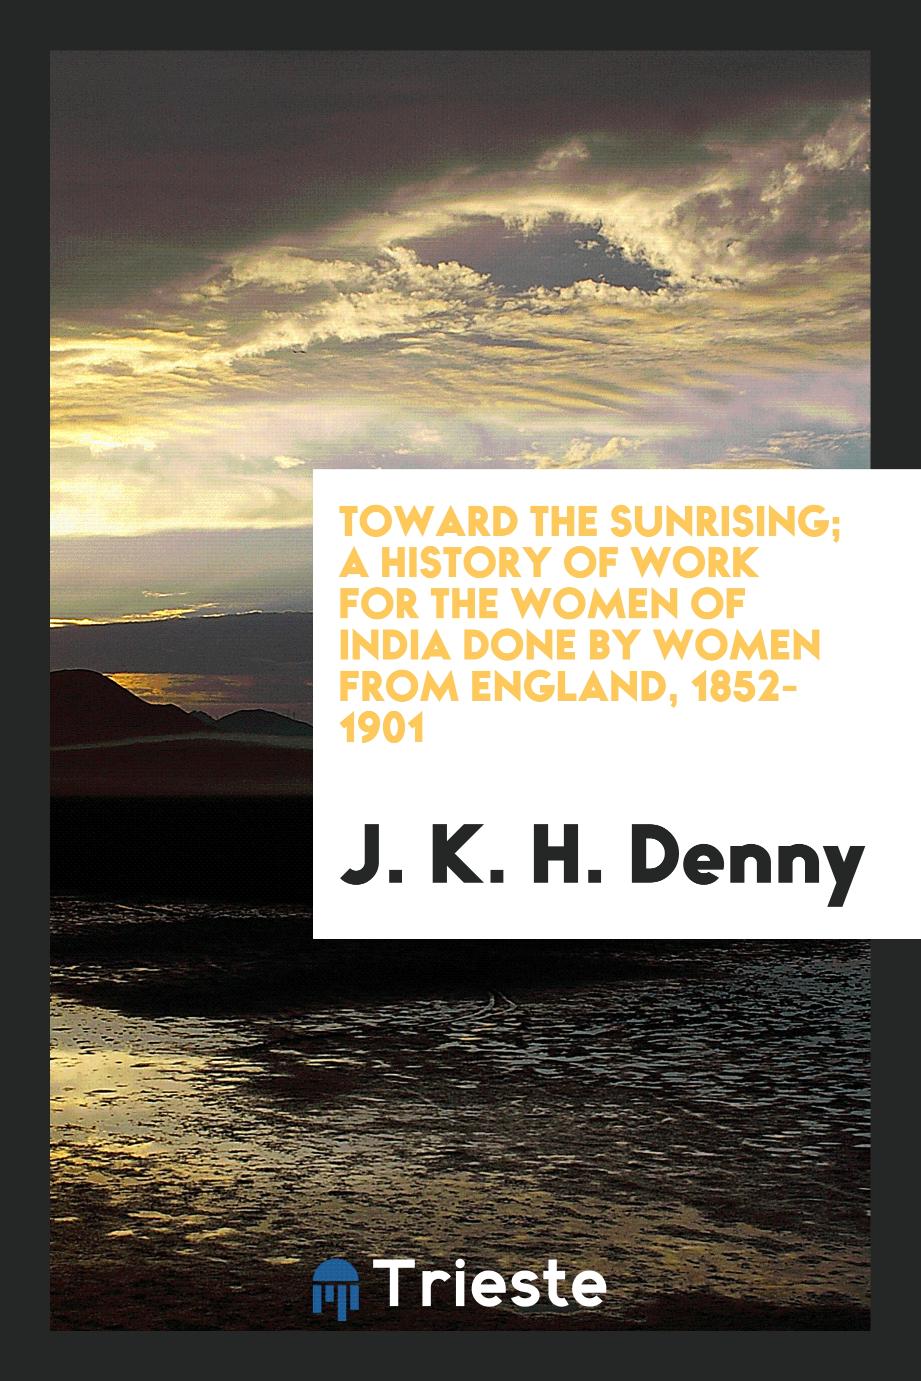 Toward the sunrising; a history of work for the women of India done by women from England, 1852-1901